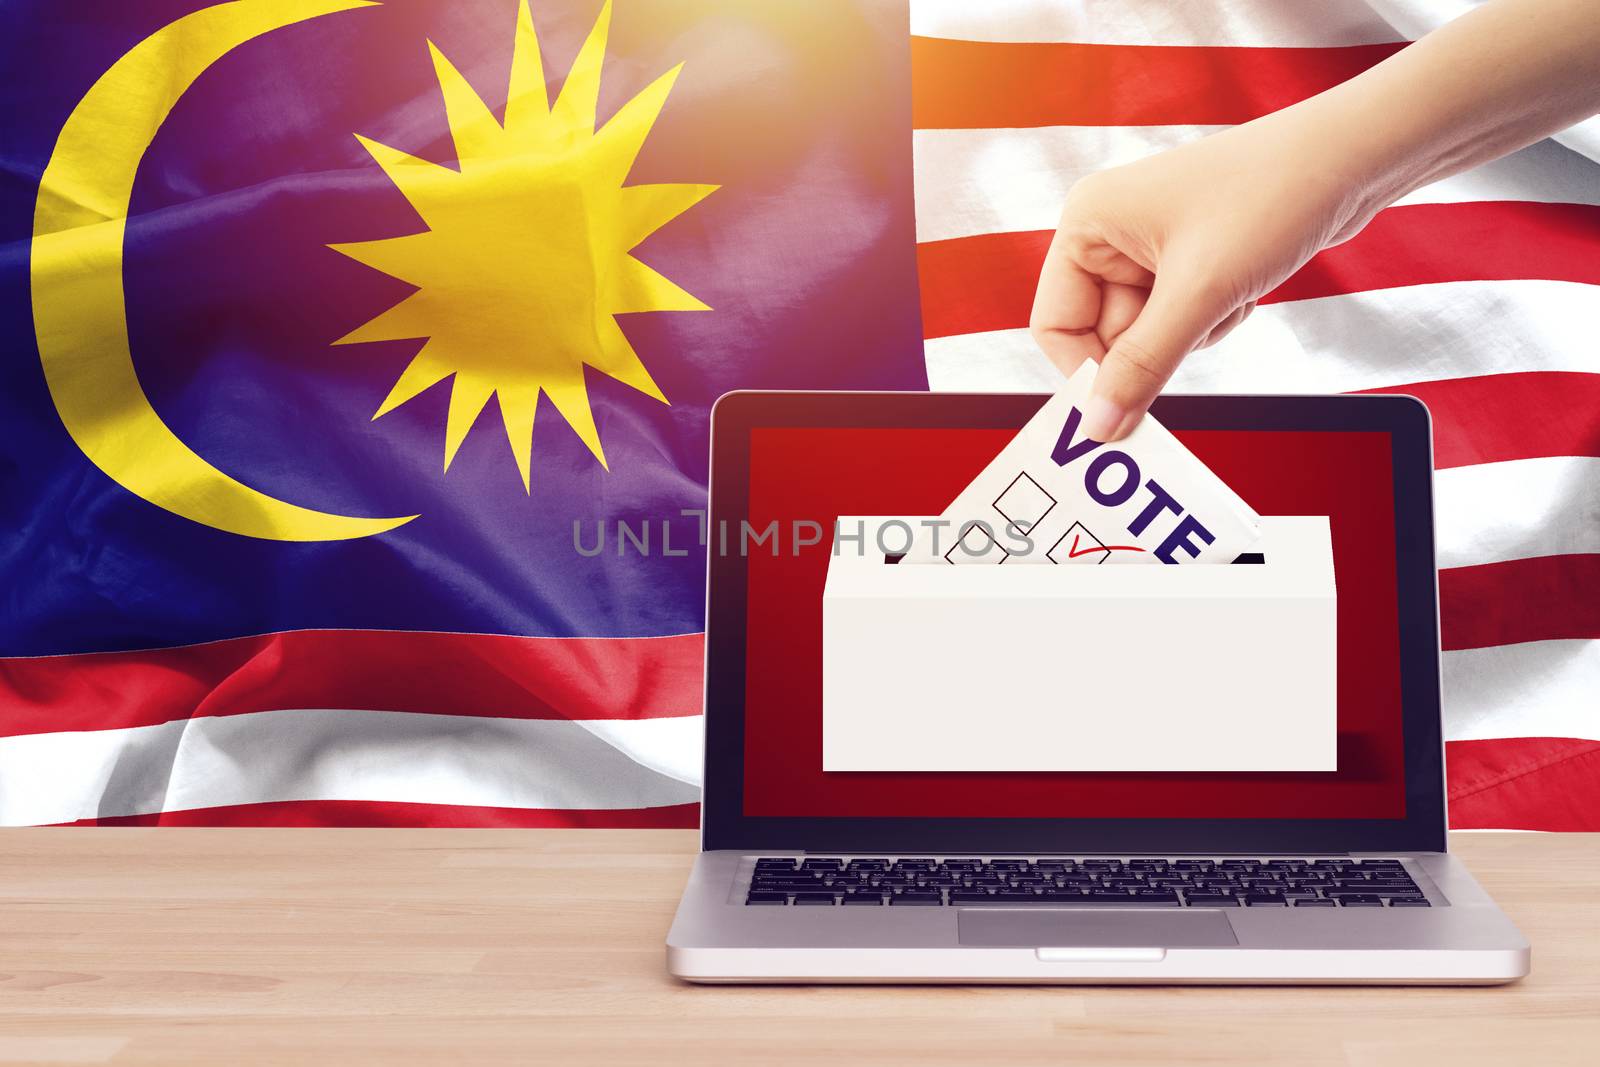 online vote , poll, exit poll for Malaysia general election concept. close up hand of a person casting a ballot at elections during voting on canvas Malaysia flag background.